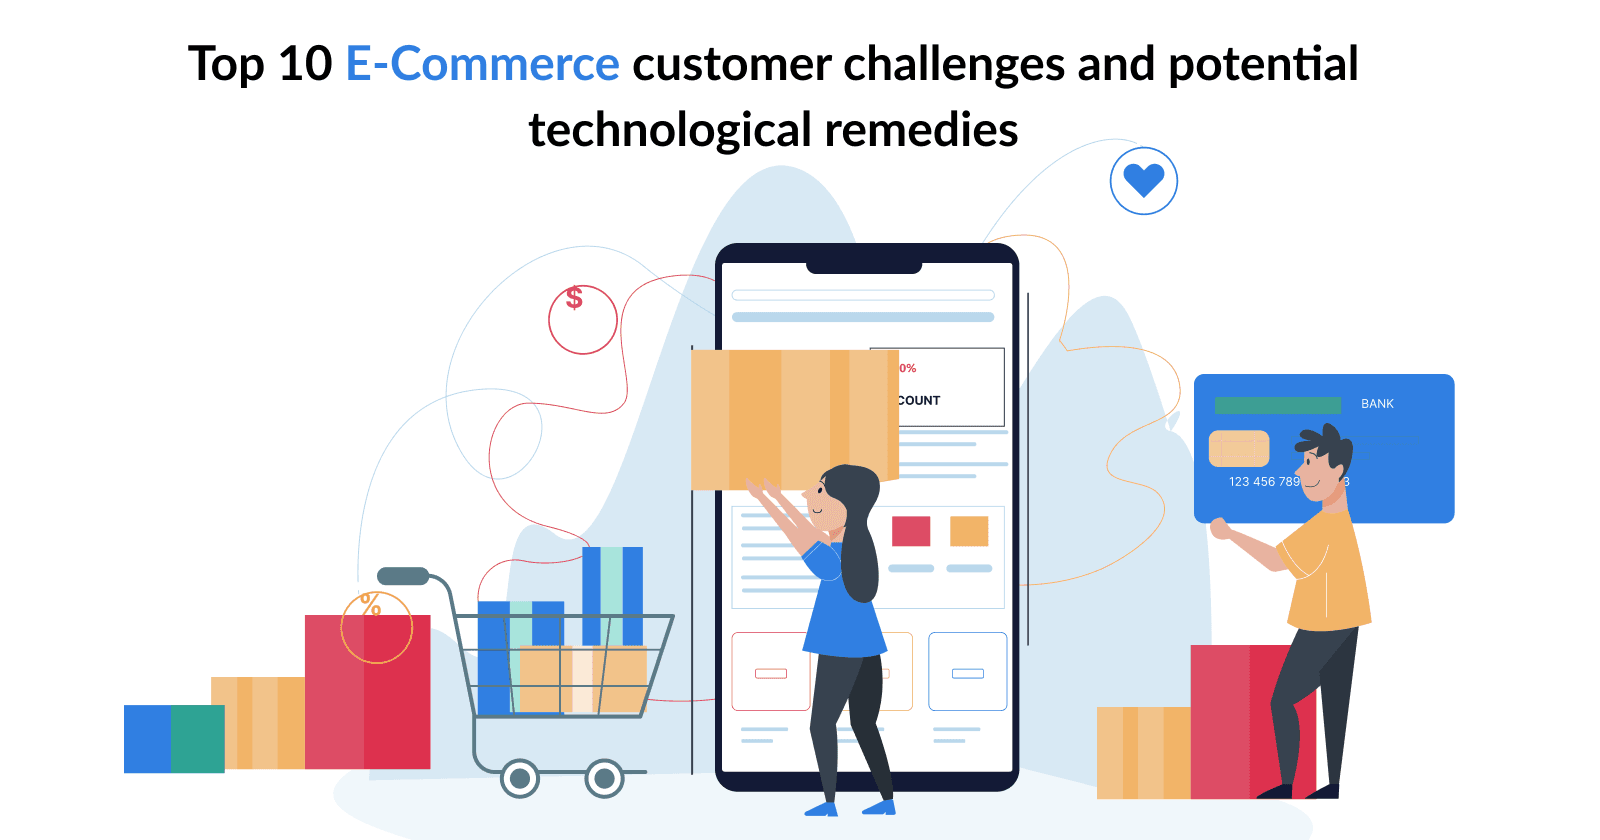 Top 10 E-Commerce customer challenges and potential technological remedies